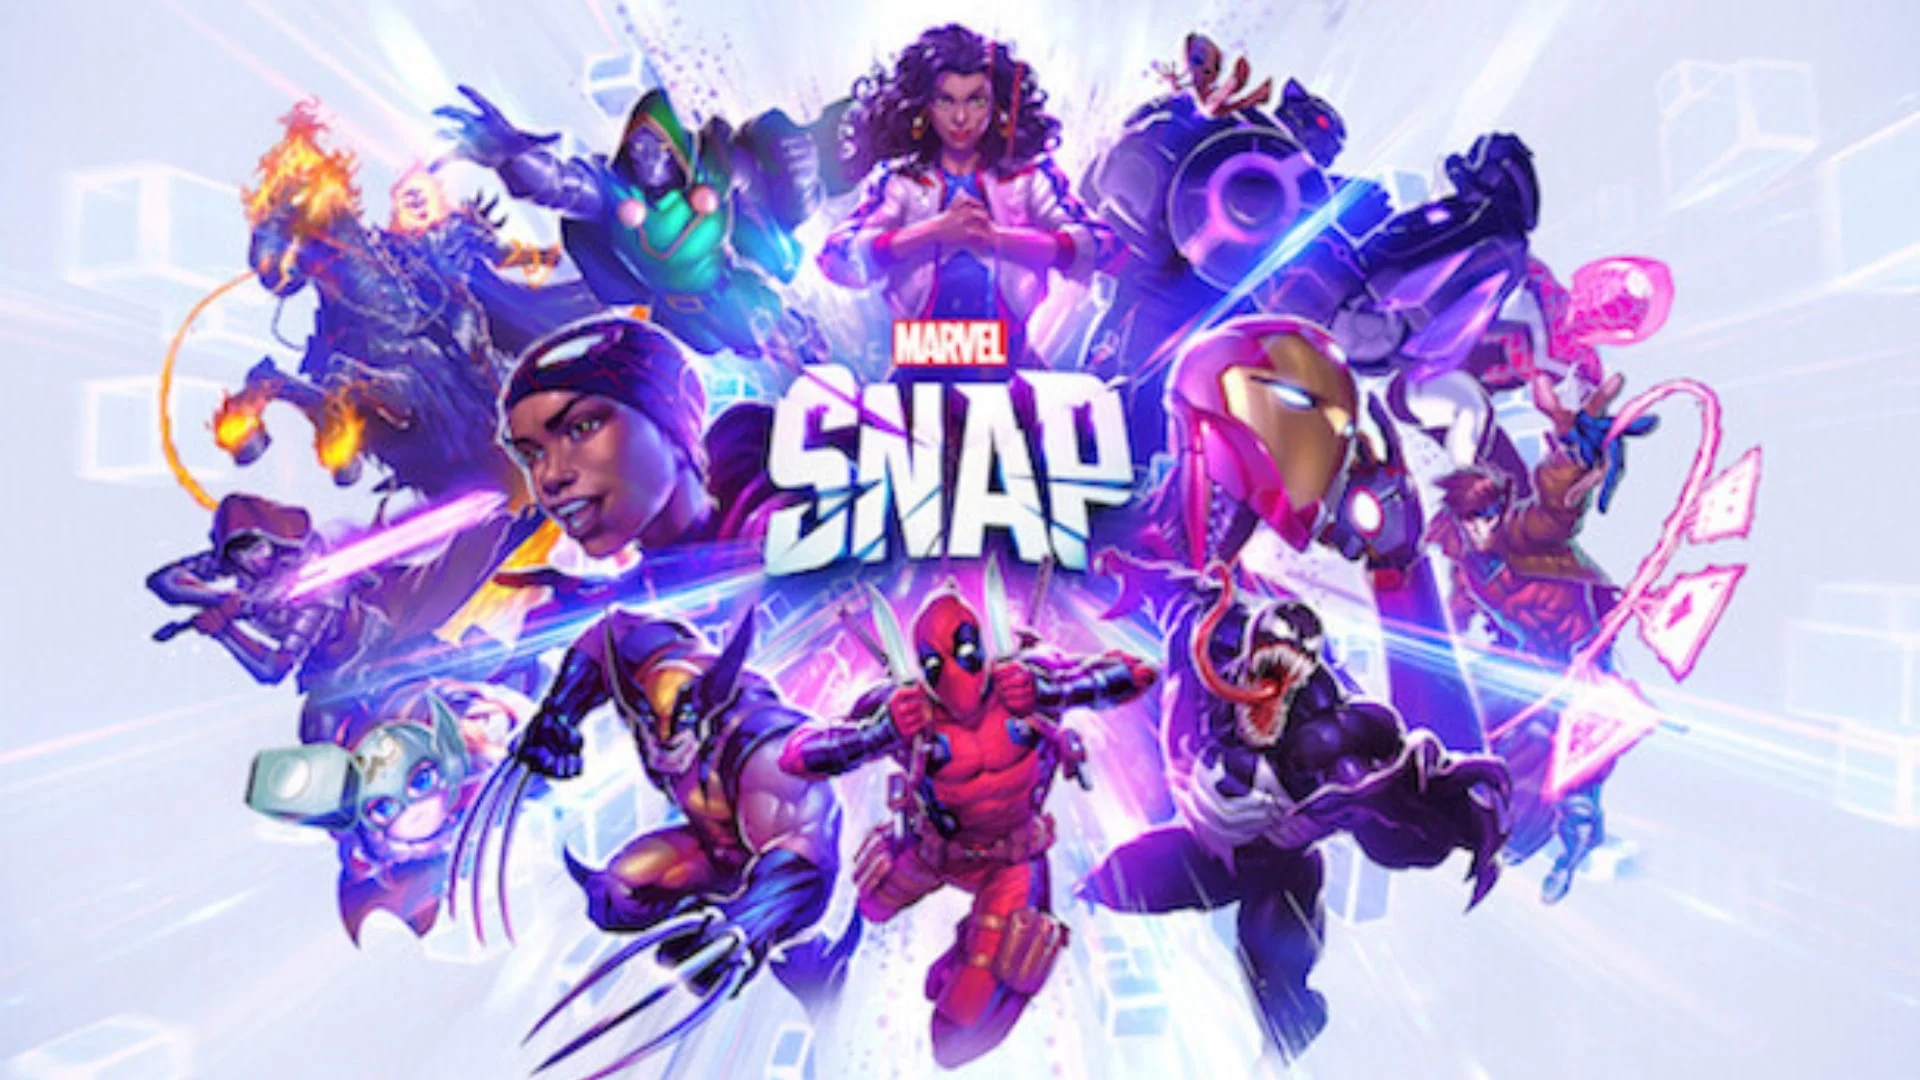 $100 bundle. What are your thoughts? : r/MarvelSnap